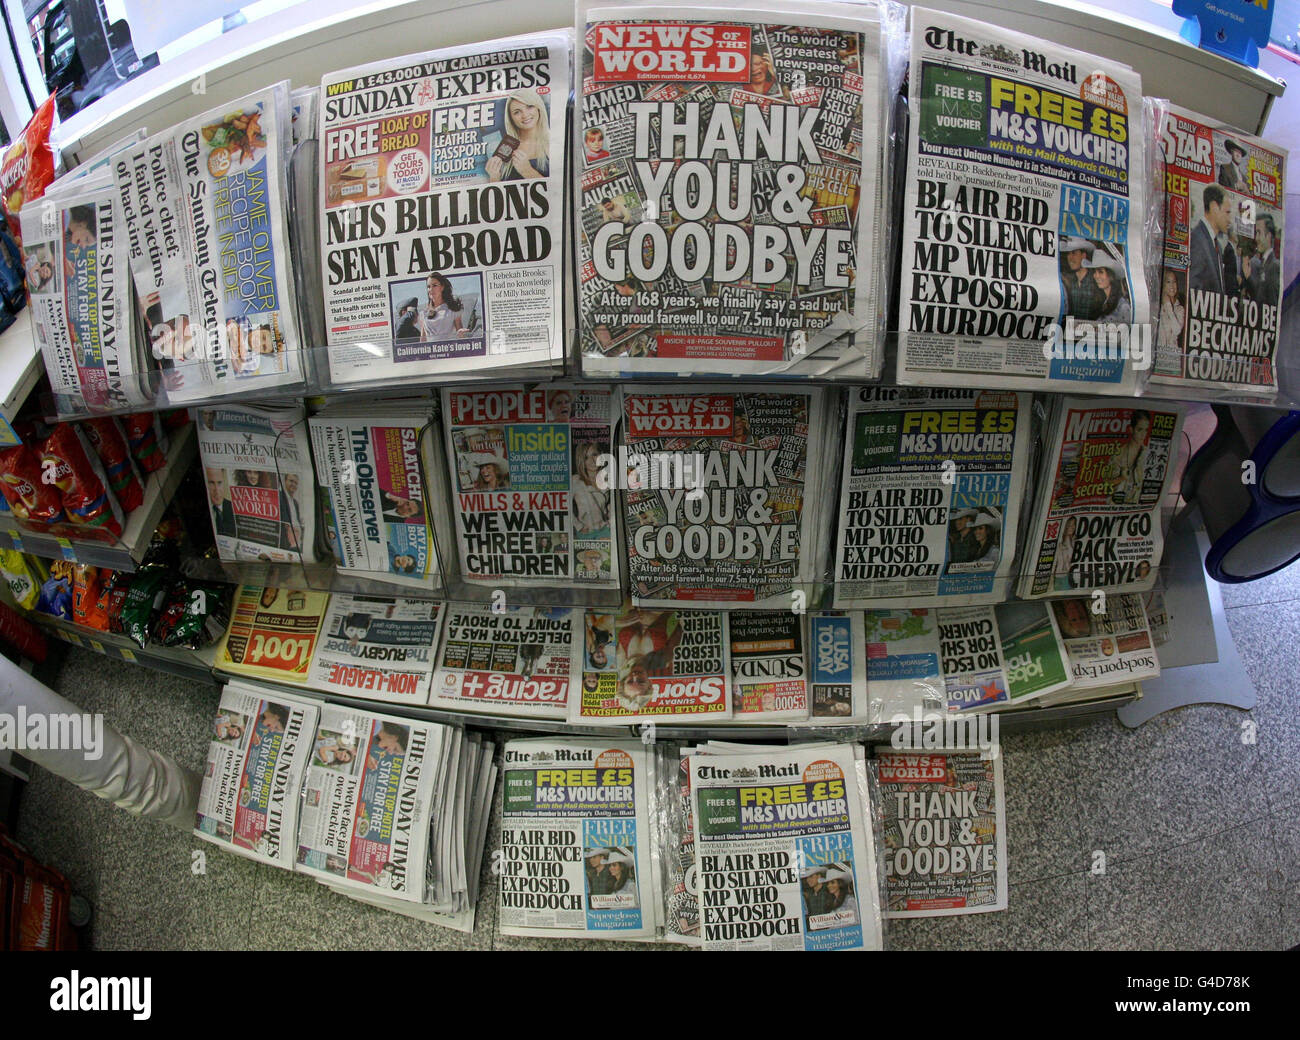 The final copy of the News of the World newspaper on sale in a shop in Stockport. Stock Photo